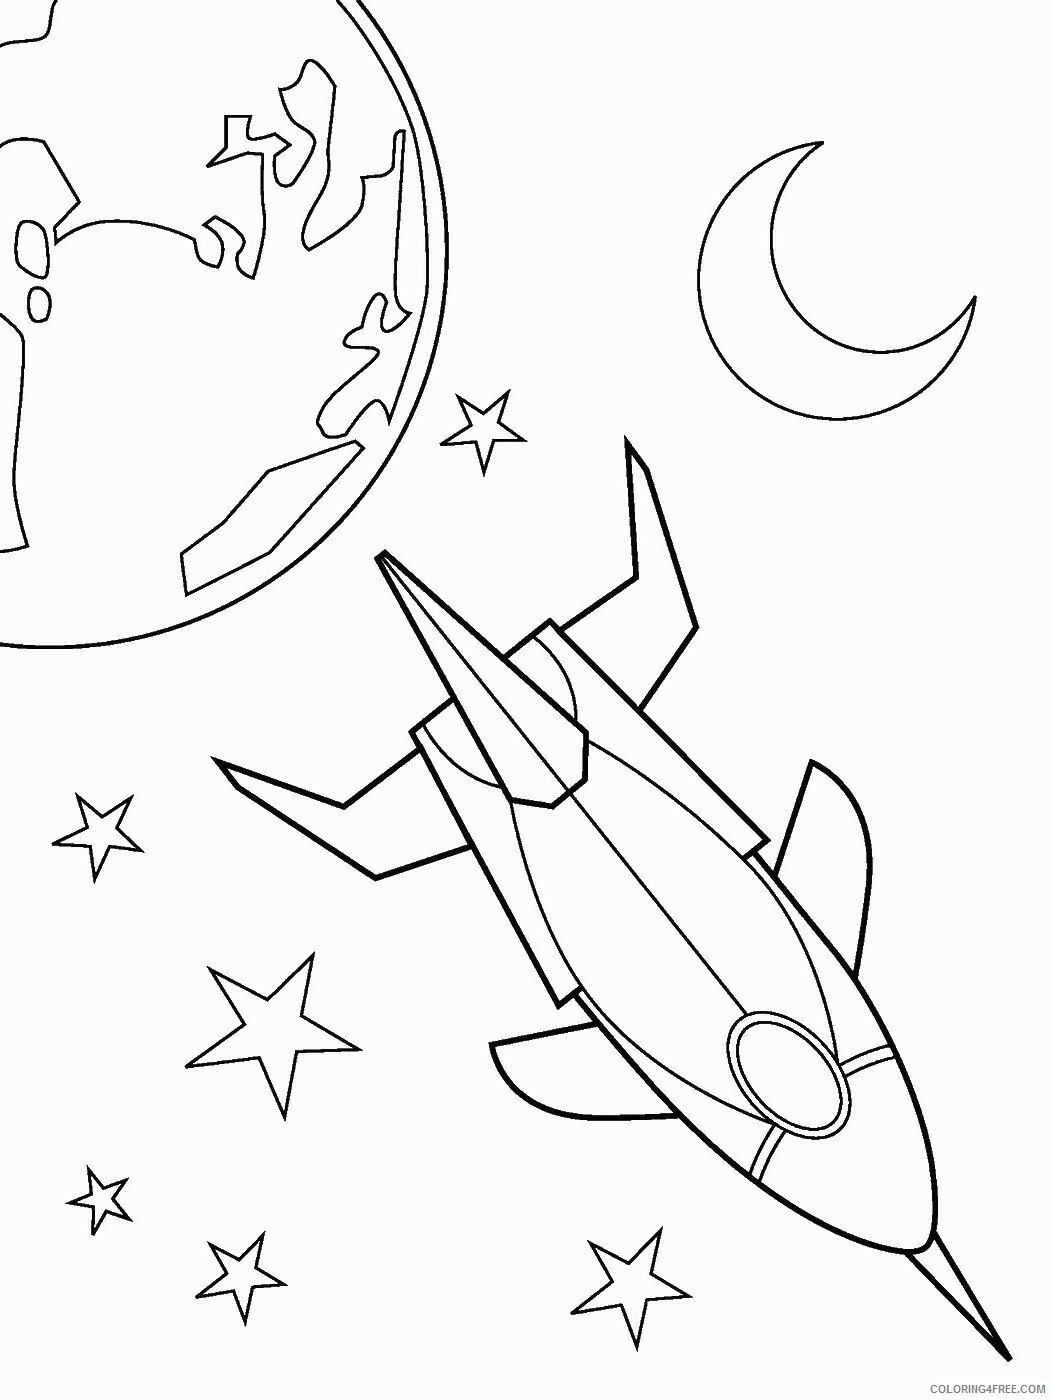 Space Coloring Pages space_031 Printable 2021 5646 Coloring4free